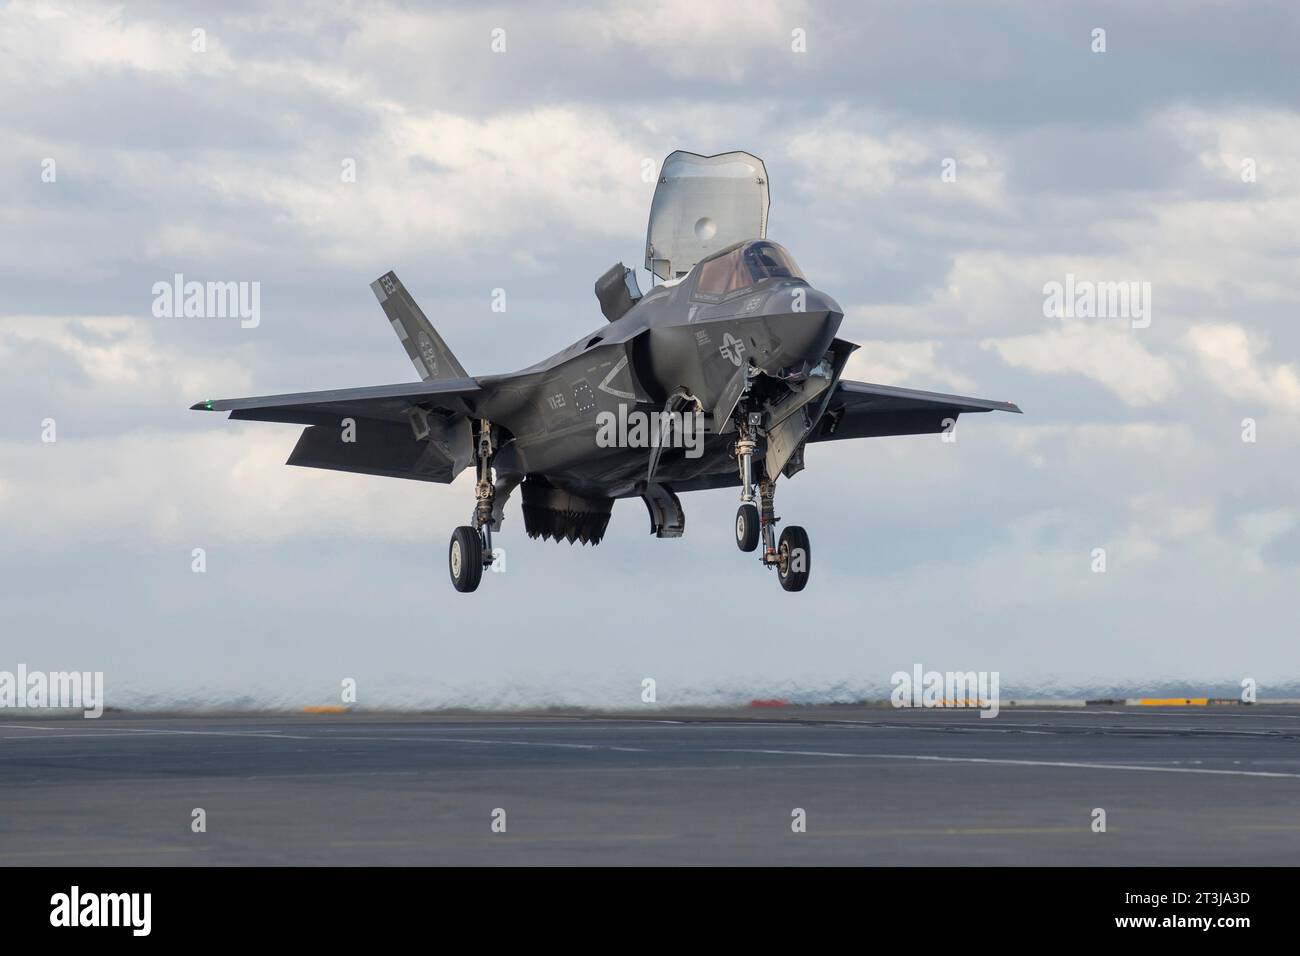 Patuxent River, United States. 24th Oct, 2023. A U.S Marine Corps F-35B Lightning II stealth fighter aircraft performs a shipborne rolling vertical landing on the flight deck of the Royal Navy Queen Elizabeth-class aircraft carrier HMS Prince of Wales during developmental test phase 3 flight trials, October 24, 2023 off the coast of Maryland, USA. Credit: Kyra Helwick/U.S. Navy Photo/Alamy Live News Stock Photo